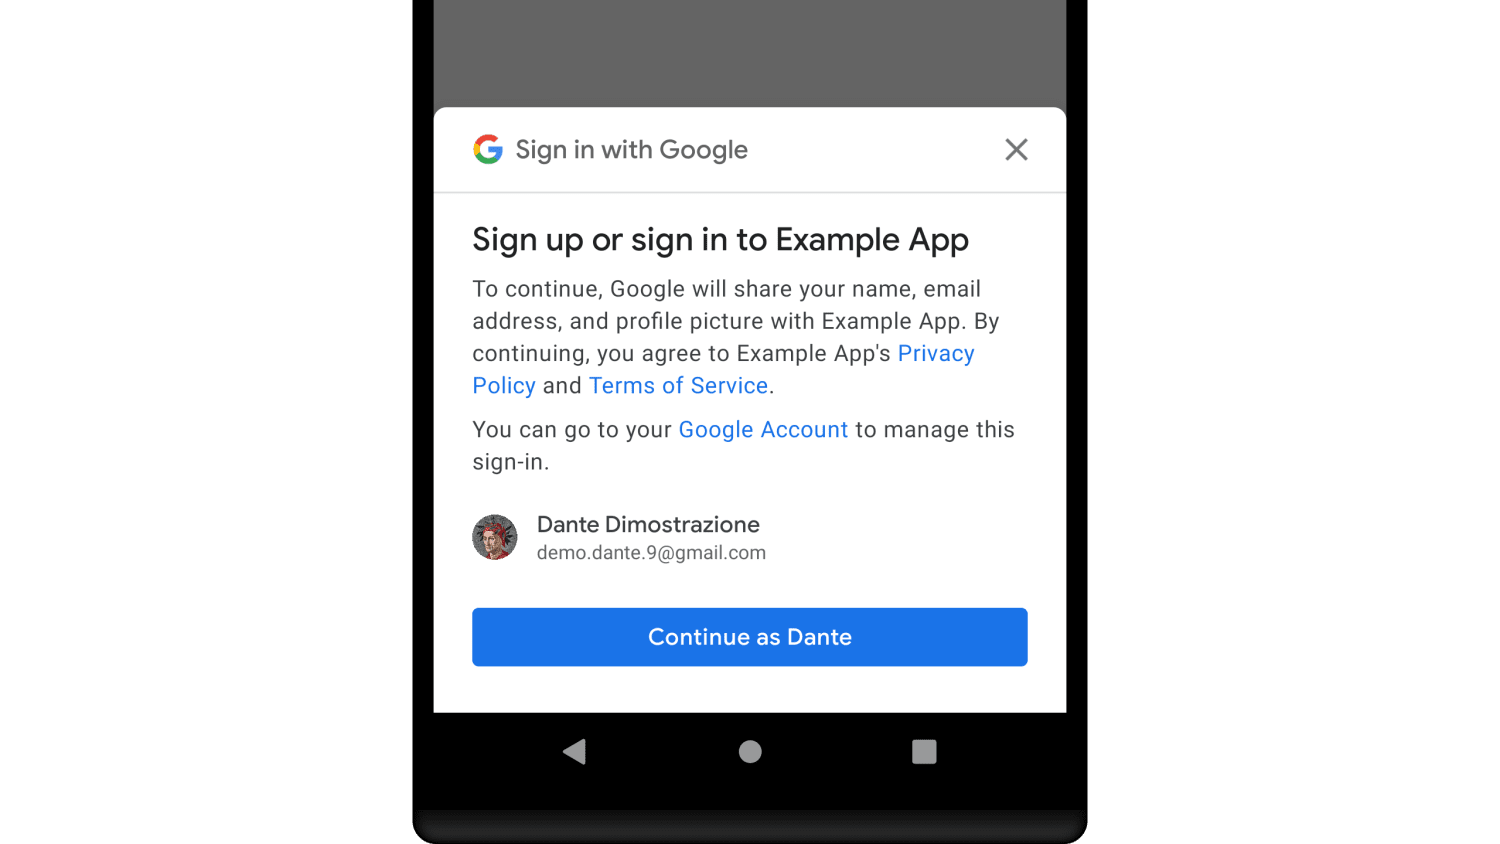 Google introduces one-tap sign-in feature for more easy access